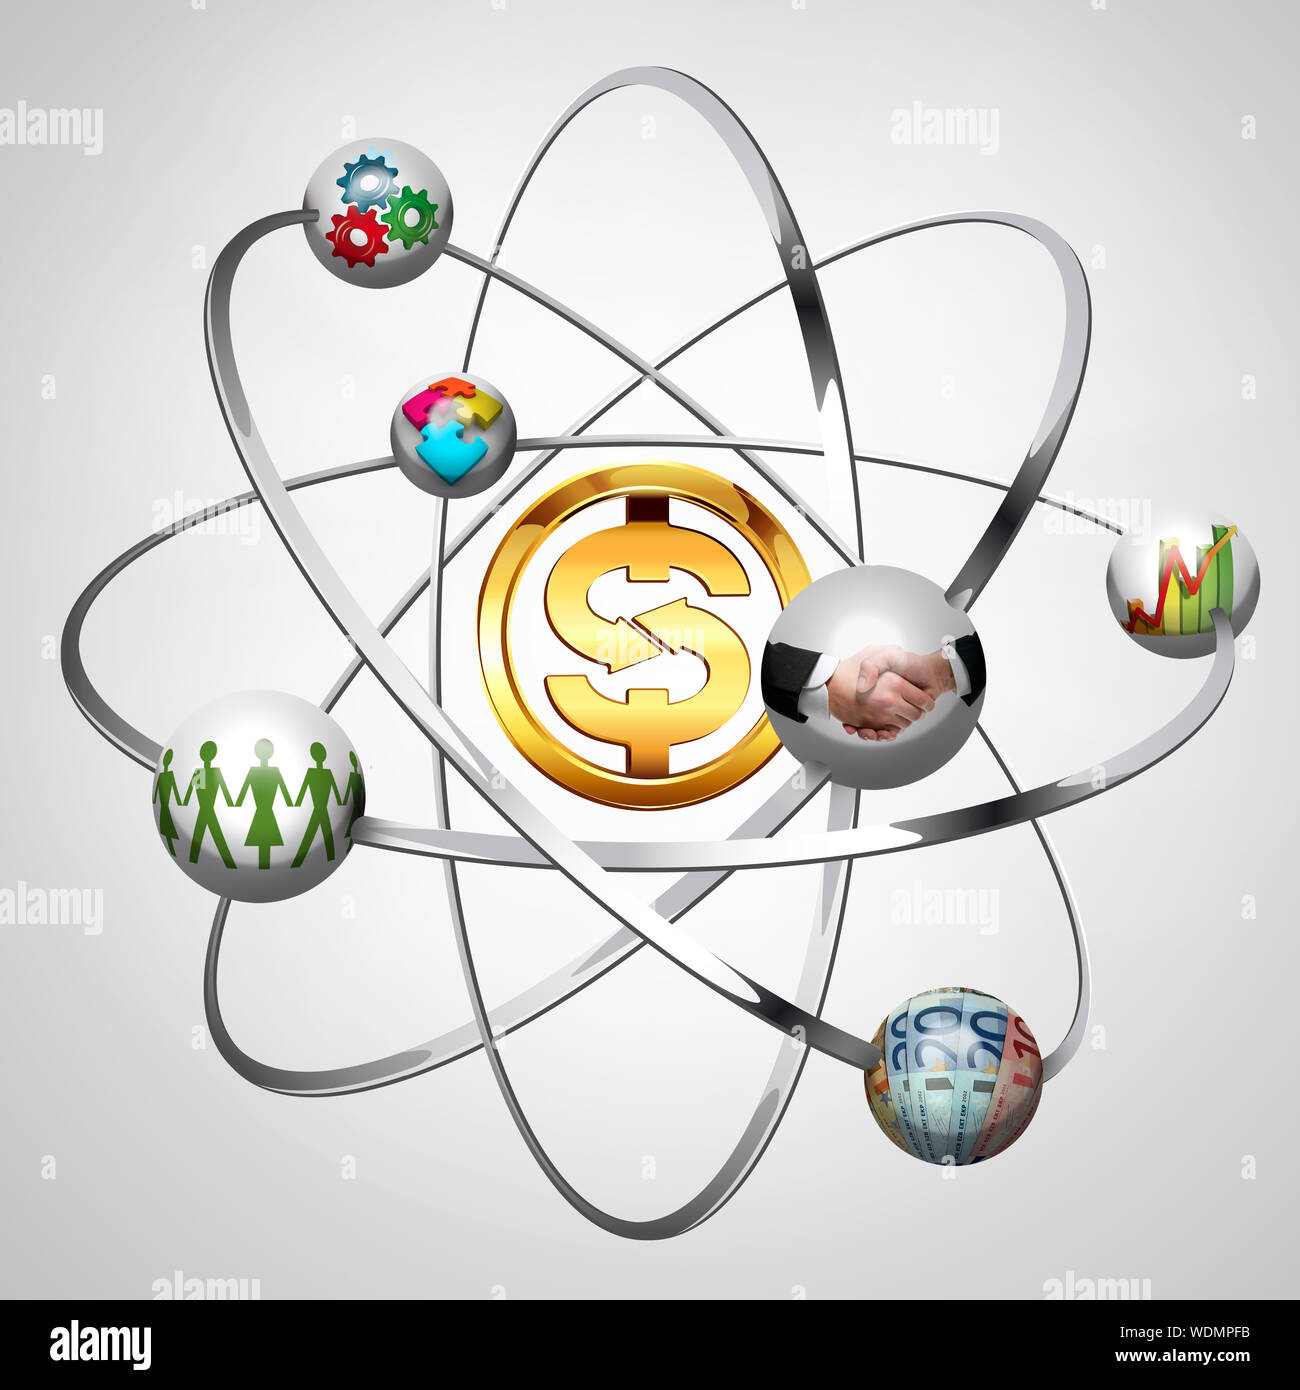 Business idea - work creative concept - atom with electrons Stock Photo